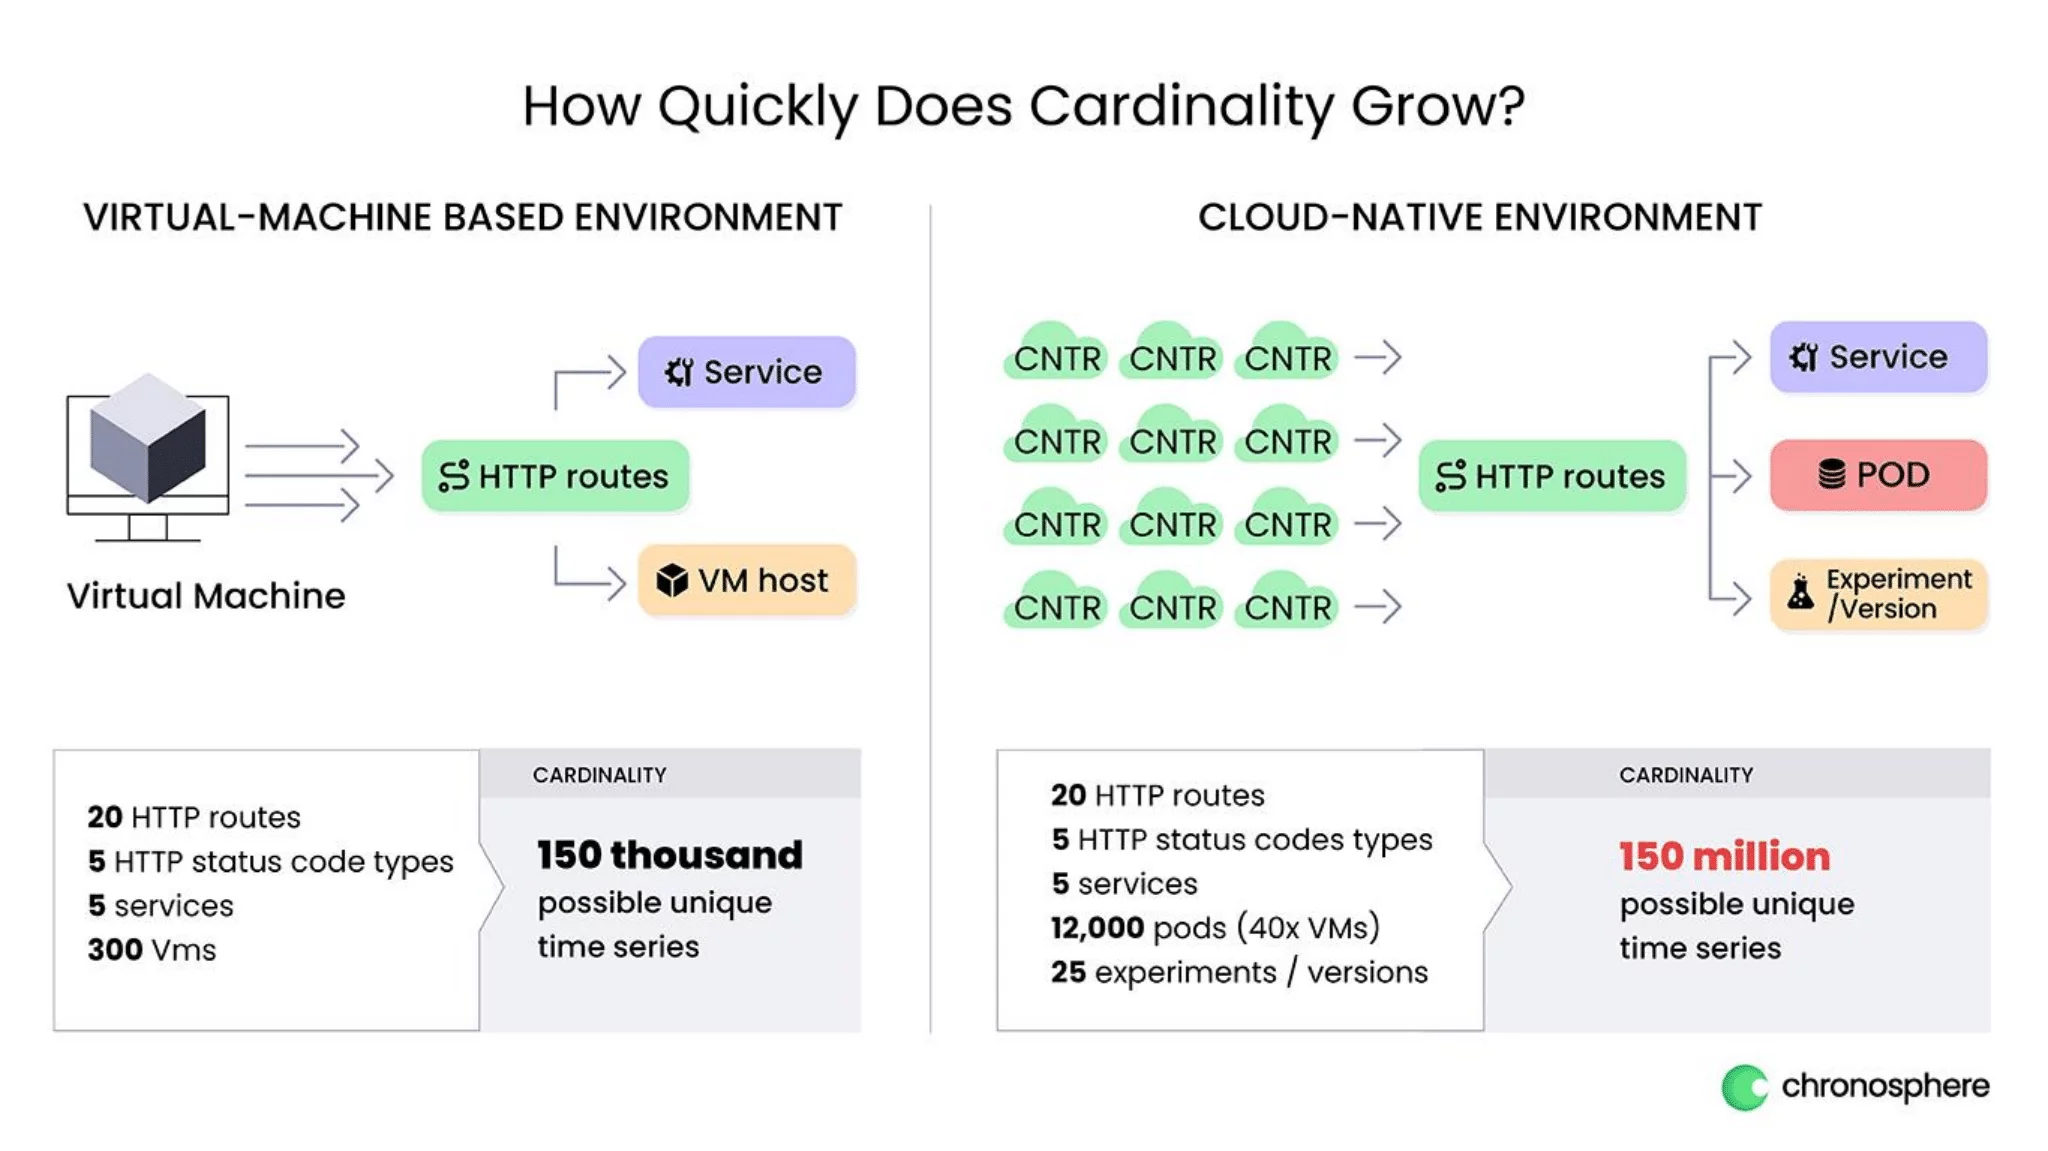 Diagram shows how quickly cardinality grows